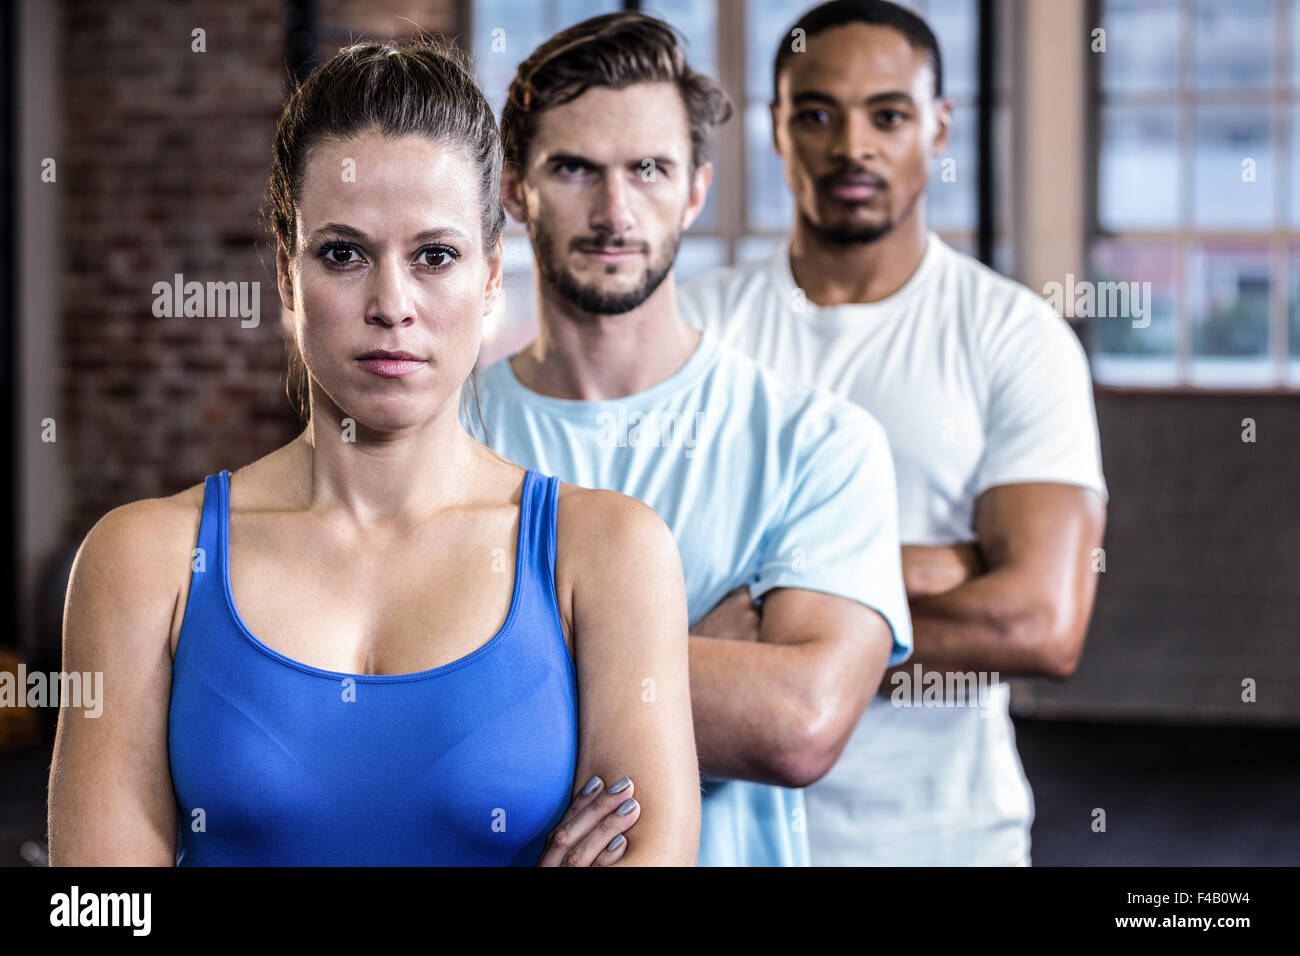 Three muscular athletes with crossed arms Stock Photo